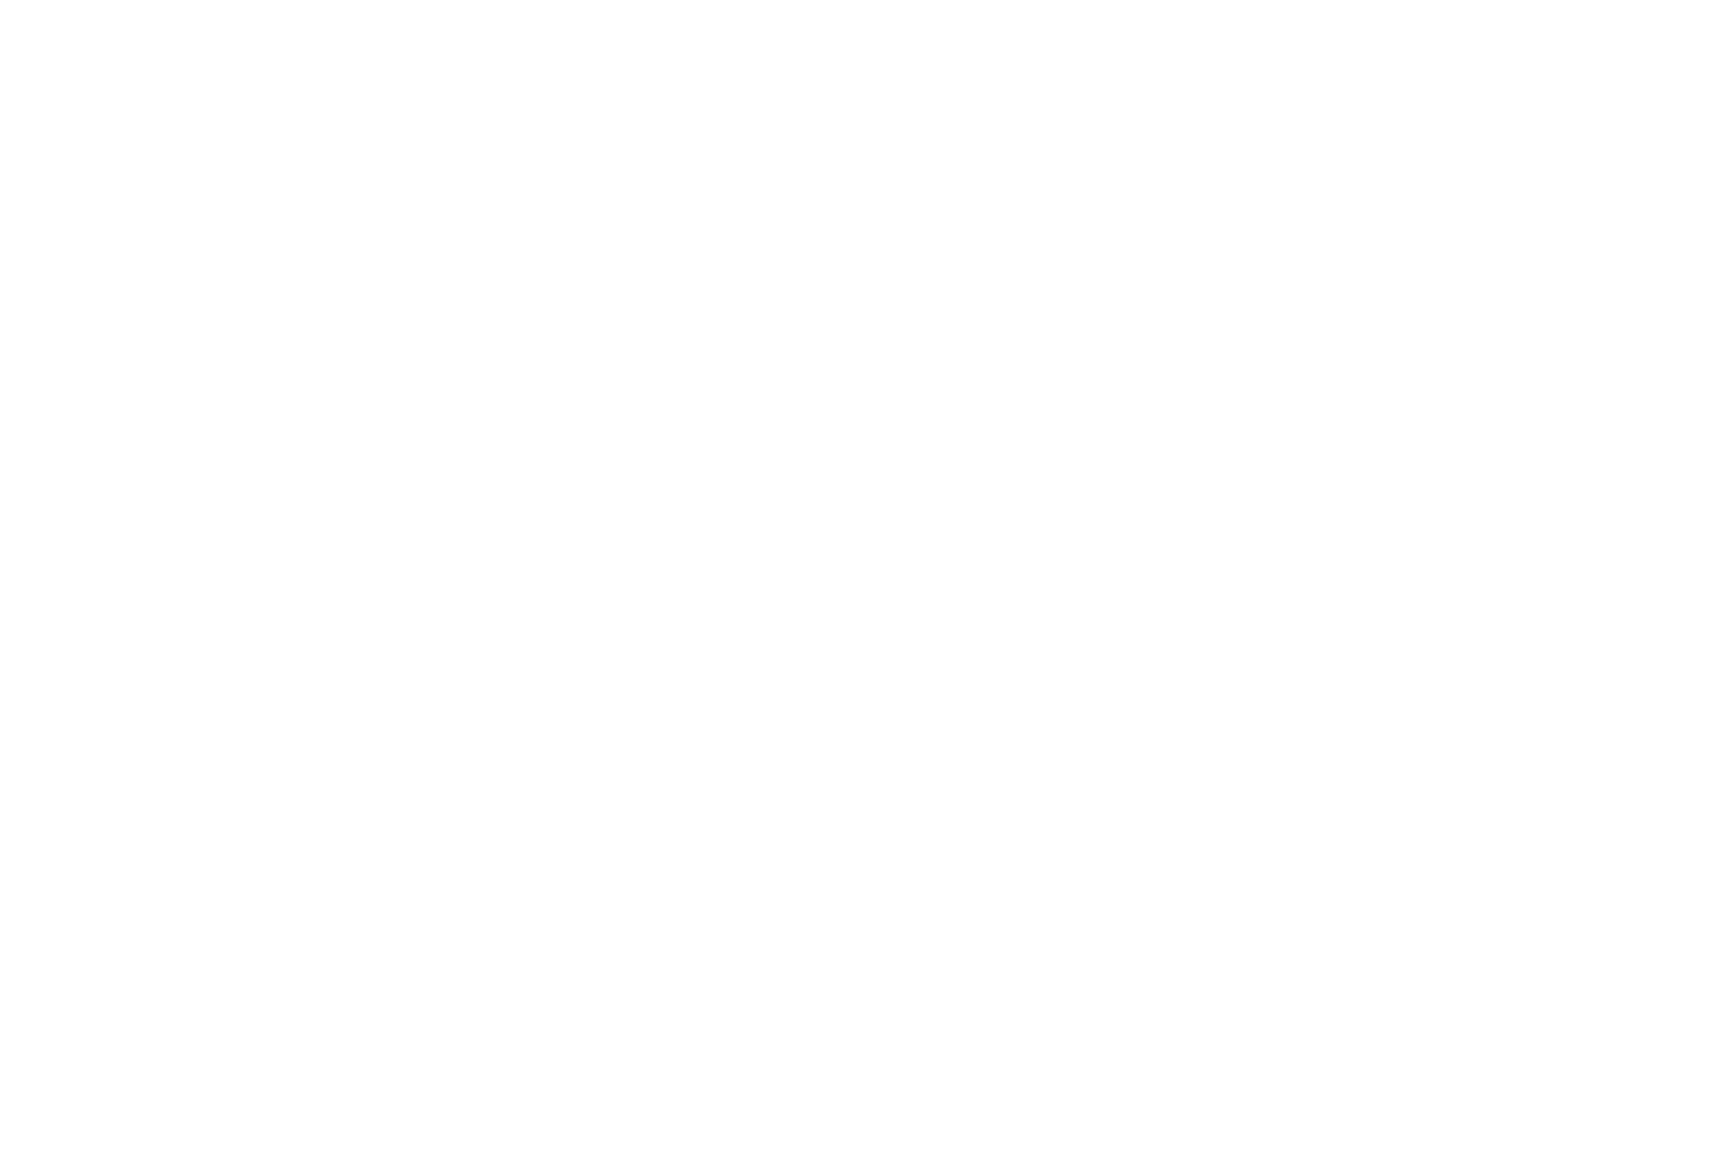 OFFICIAL SELECTION - New York World Film Festival - 2021 (1).png